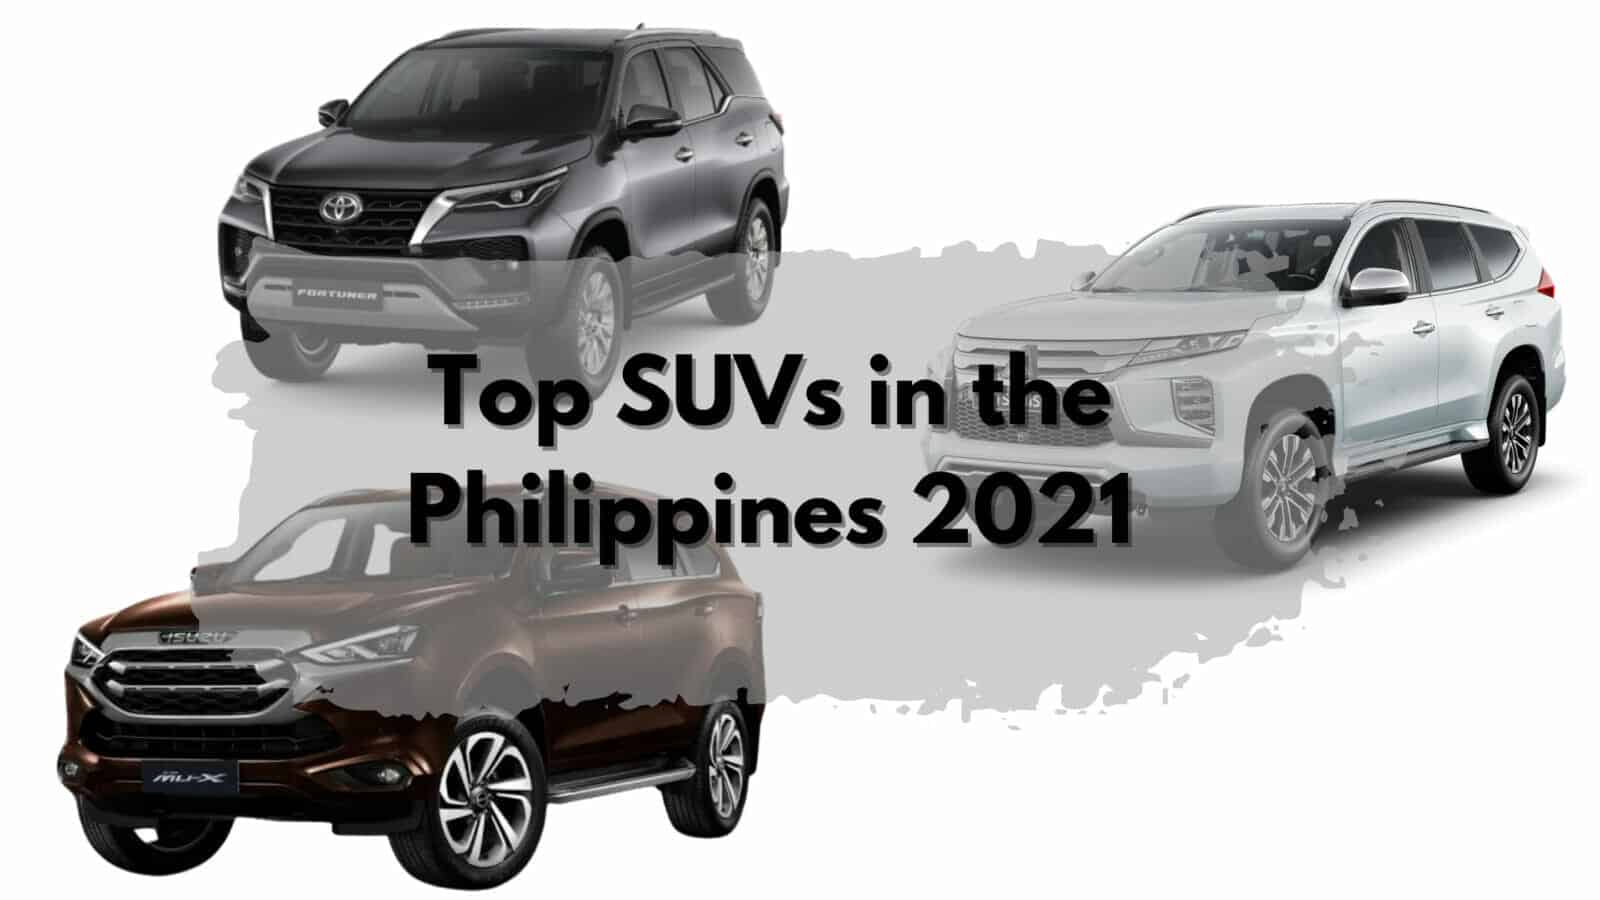 Top SUVs in the Philippines in 2021.